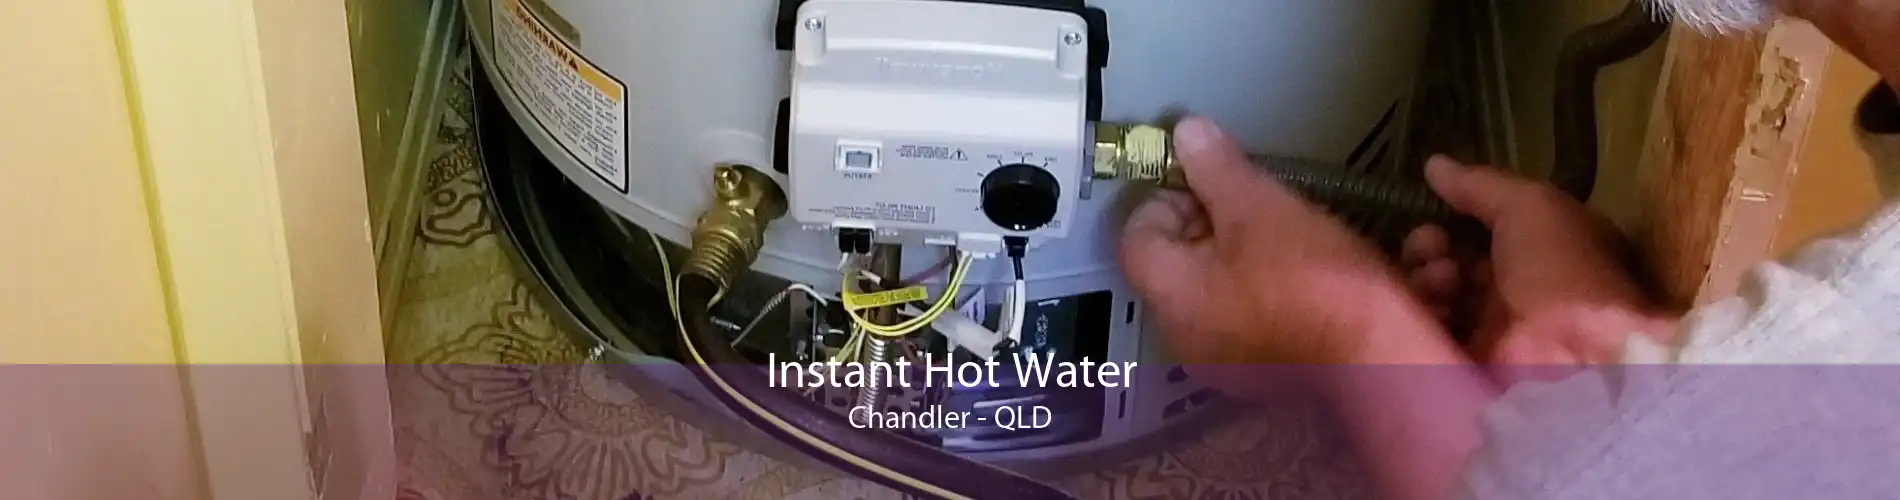 Instant Hot Water Chandler - QLD